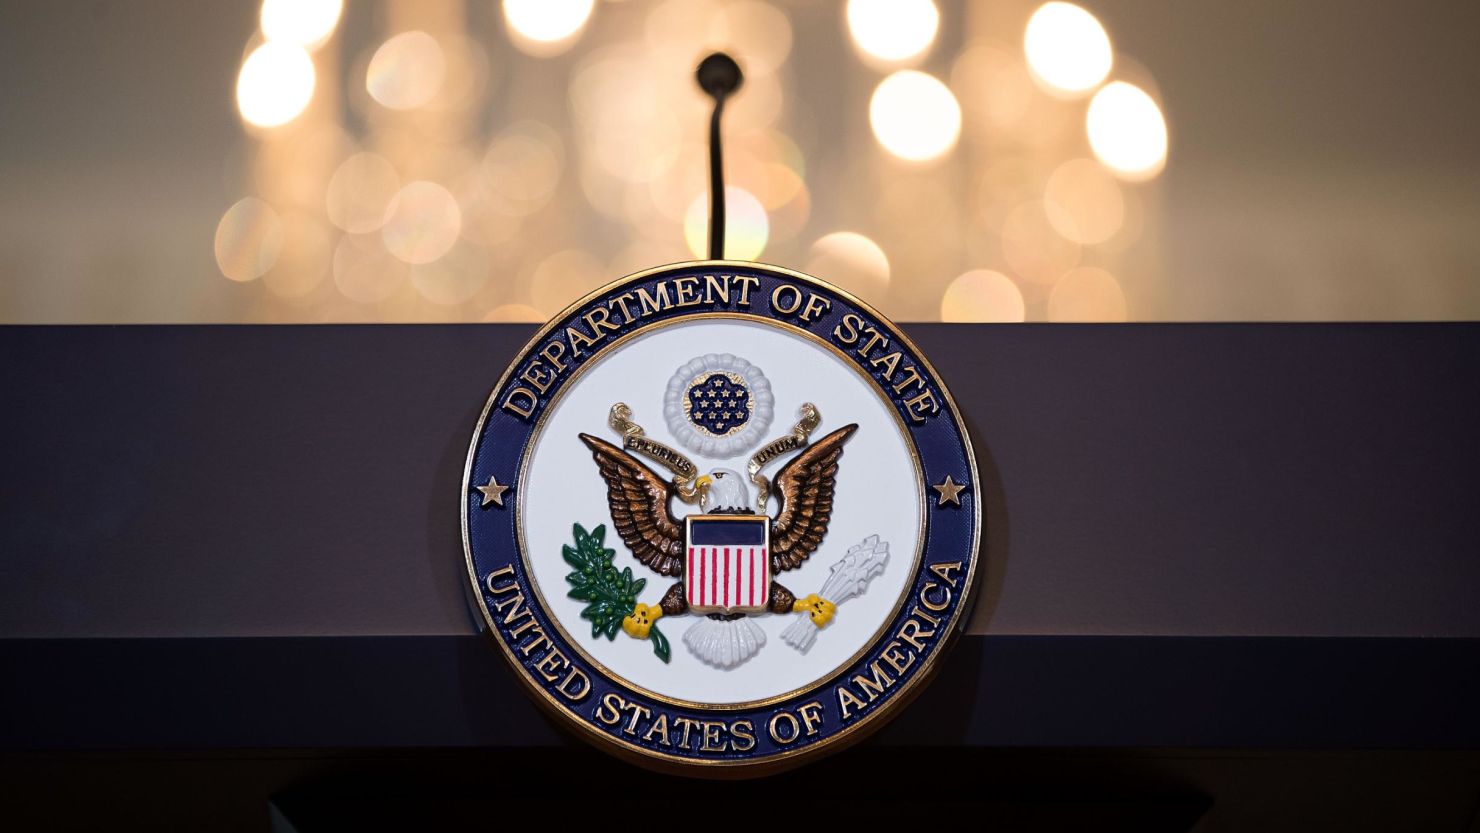 WASHINGTON, DC - JUNE 09:  A view of the State Department seal on the podium. (Photo by Drew Angerer/Getty Images)